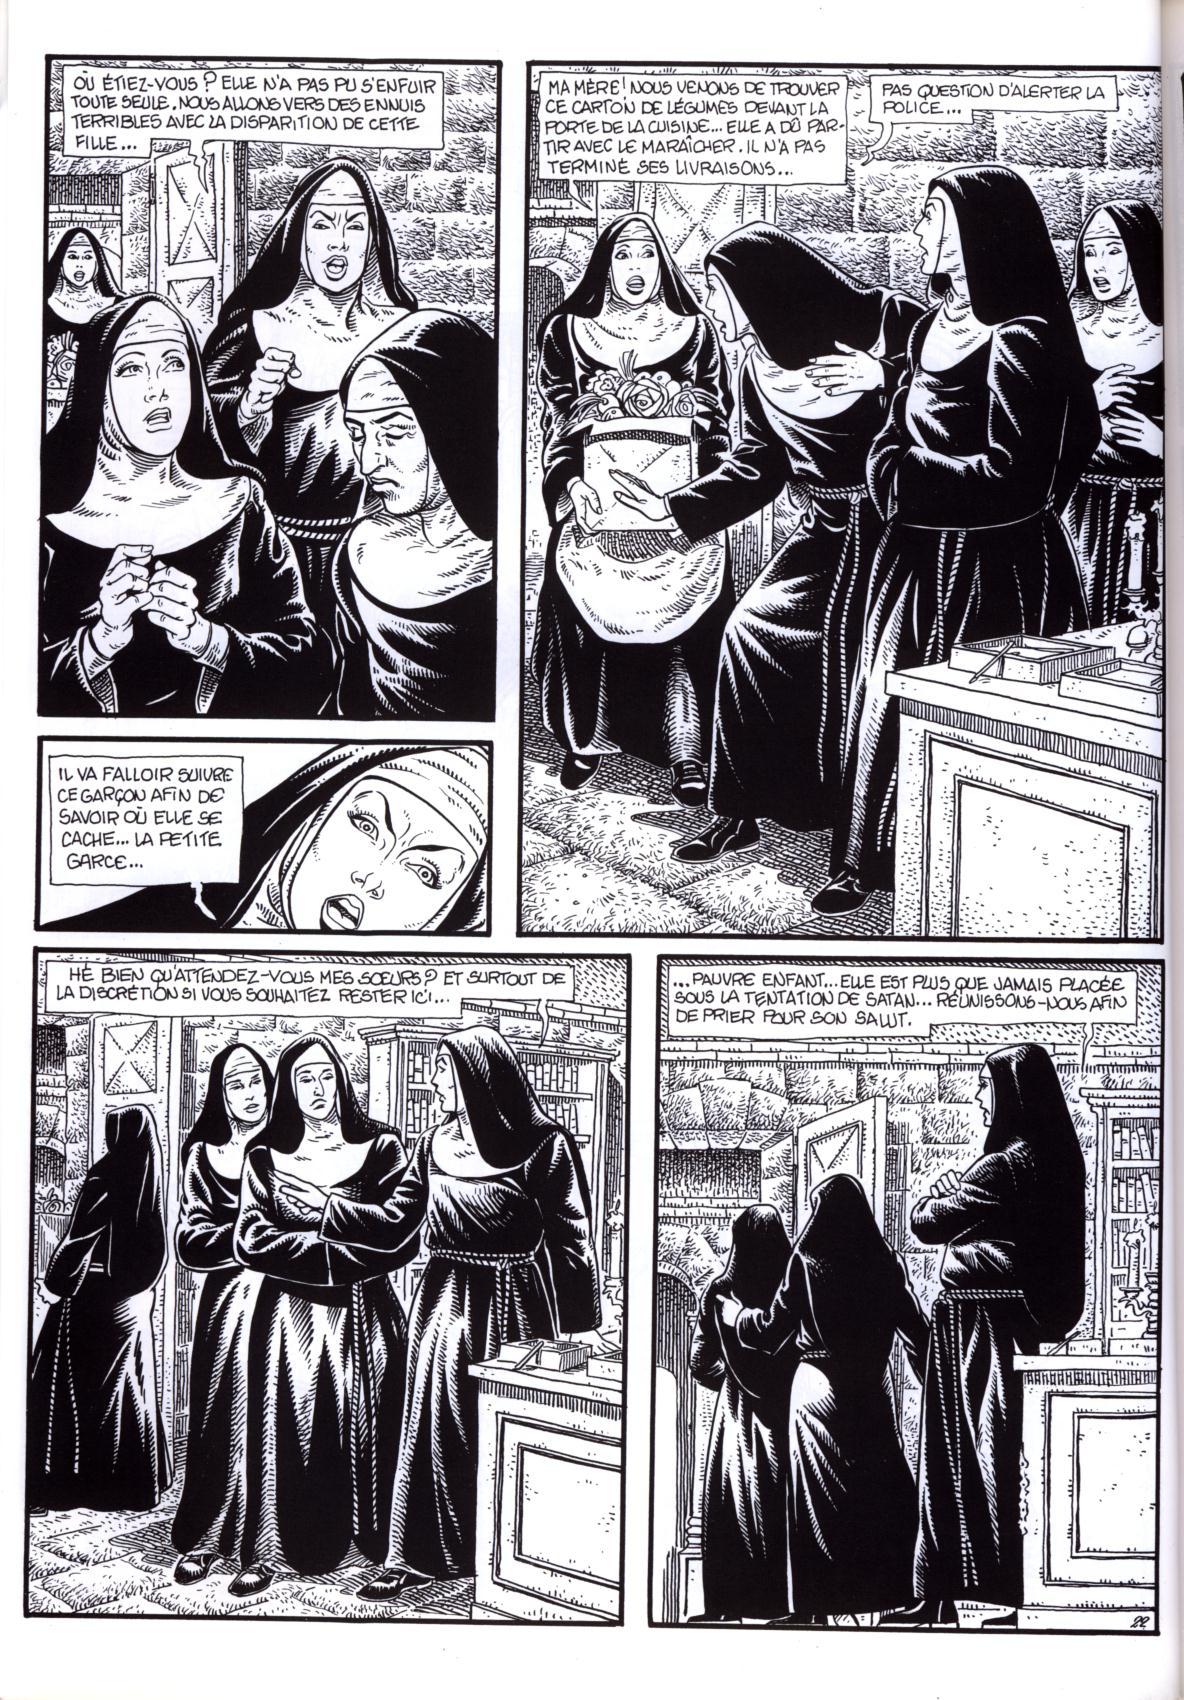 The Mary Magdalene Boarding School - Volume 3 numero d'image 24